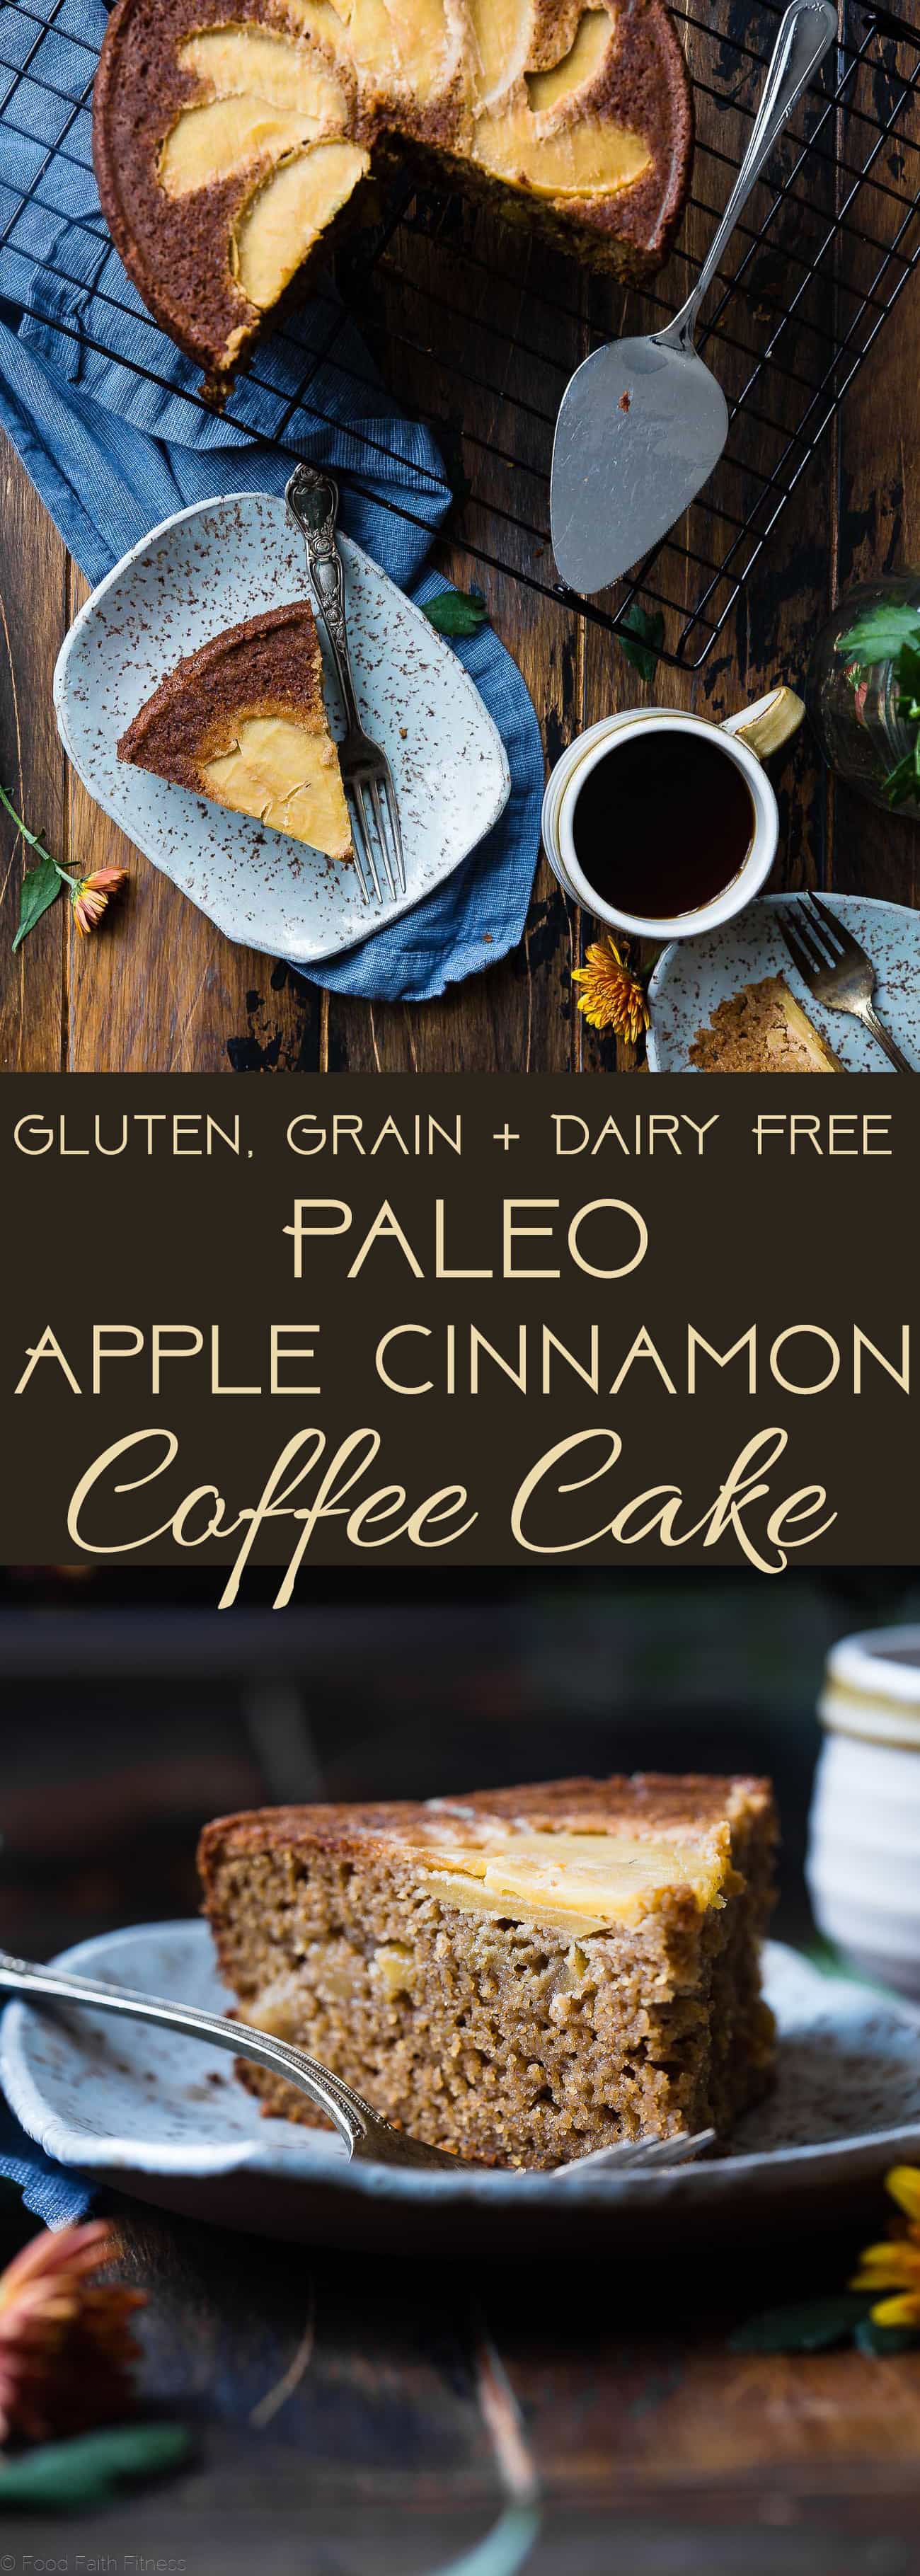 Gluten Free Apple Cinnamon Coffee Cake - This gluten free coffee cake is made with almond flour, apples and naturally sweetened with coconut sugar. Its a healthy, paleo and freezer-friendly breakfast that you will never believe is butter and oil free! | Foodfaithfitness.com | @FoodFaithFit